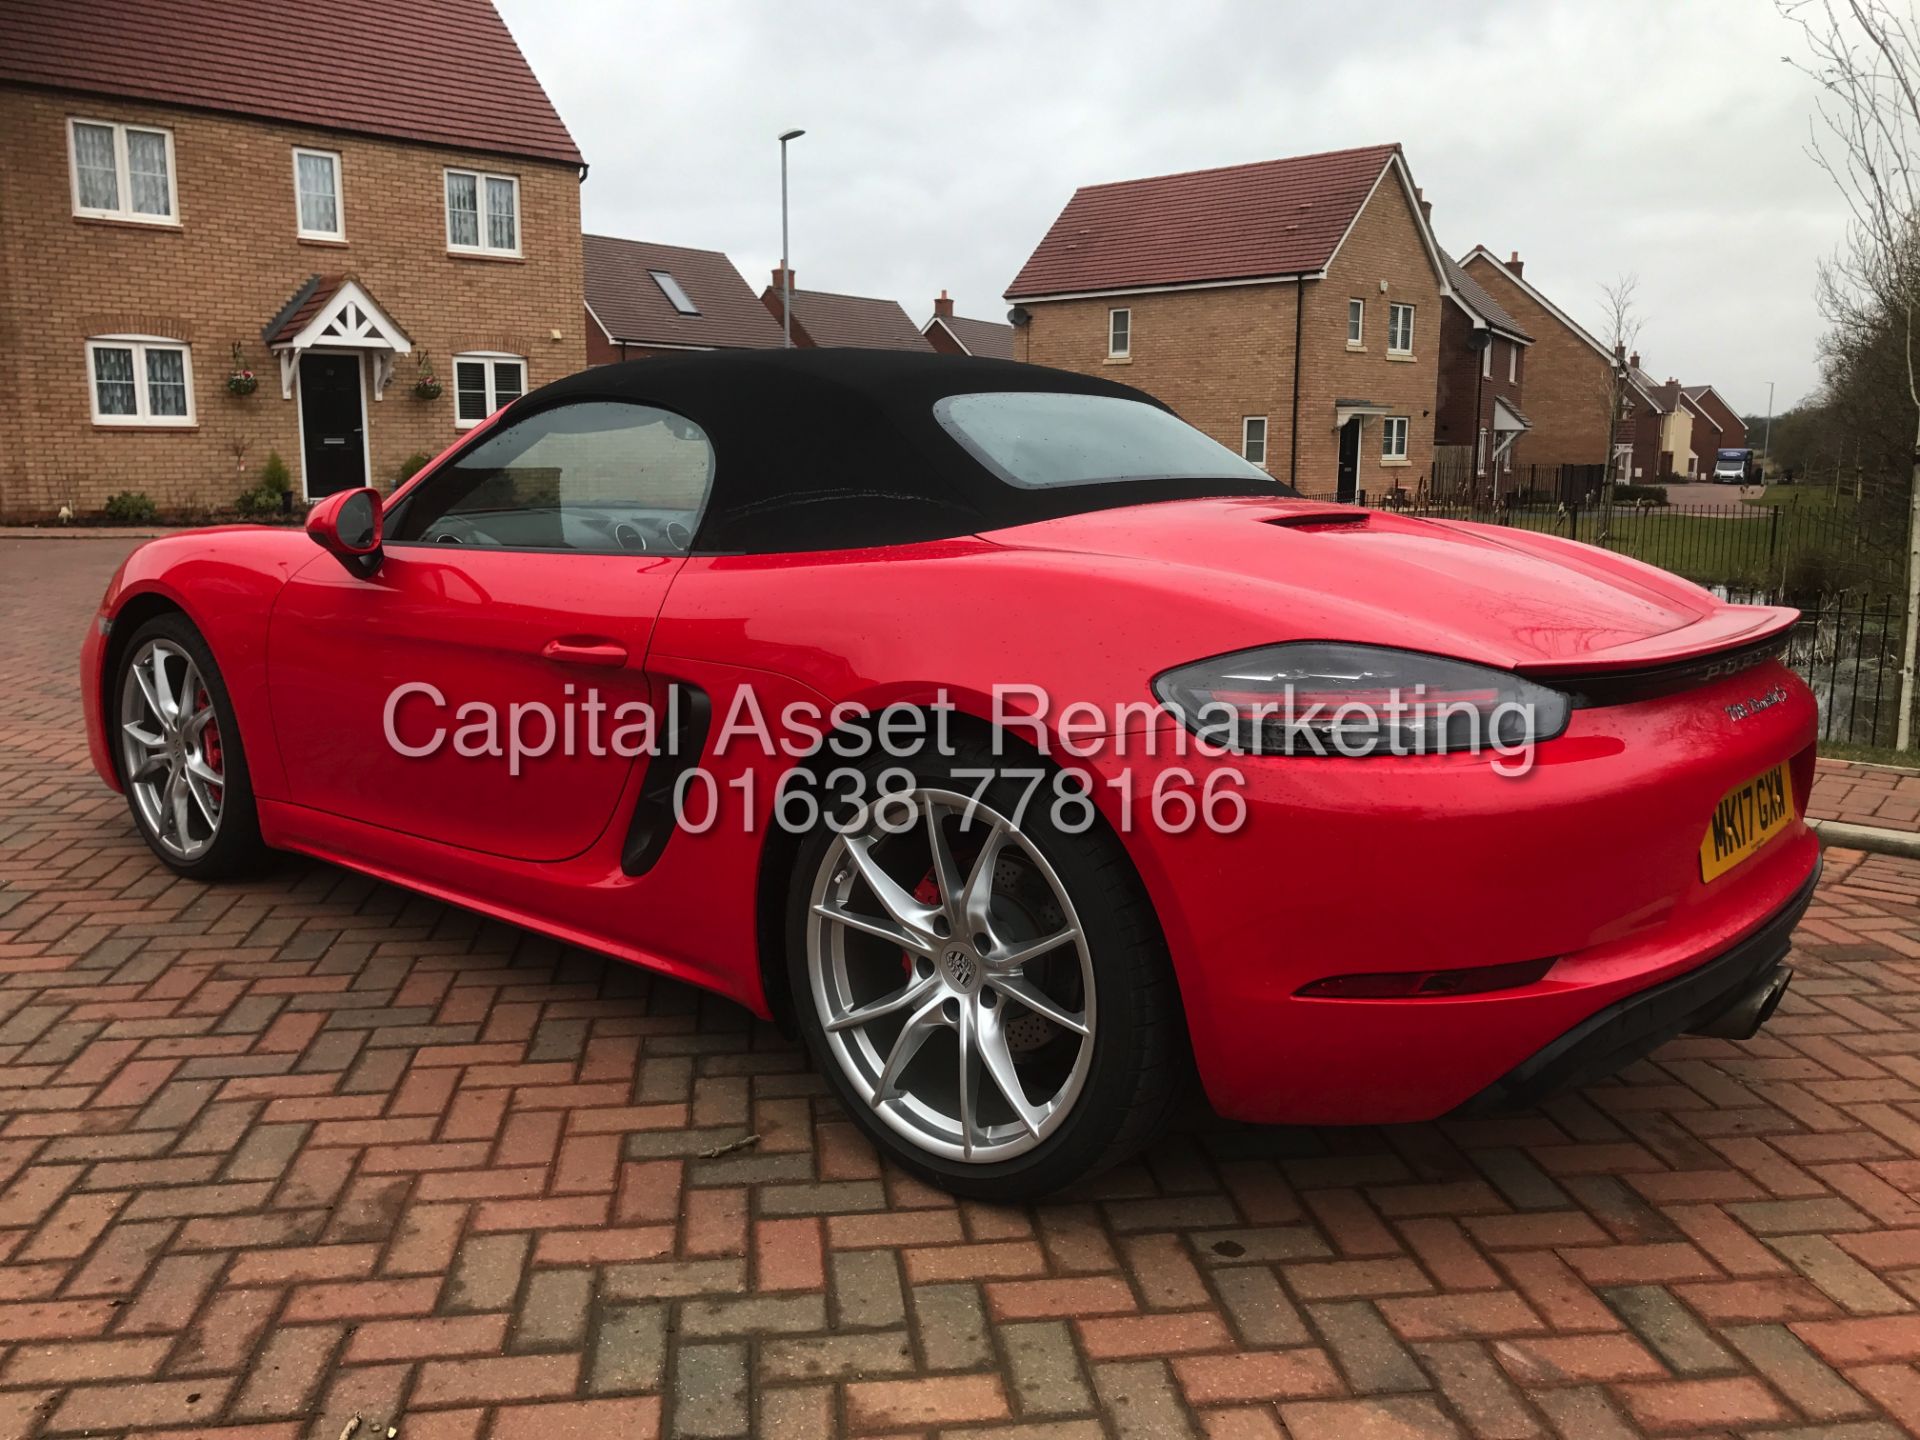 (ON SALE) PORSCHE BOXSTER S (718)CONVERTIBLE (17REG) NEW SHAPE-350 BHP-PDK AUTO' (1 OWNER-LOW MILES) - Image 14 of 34